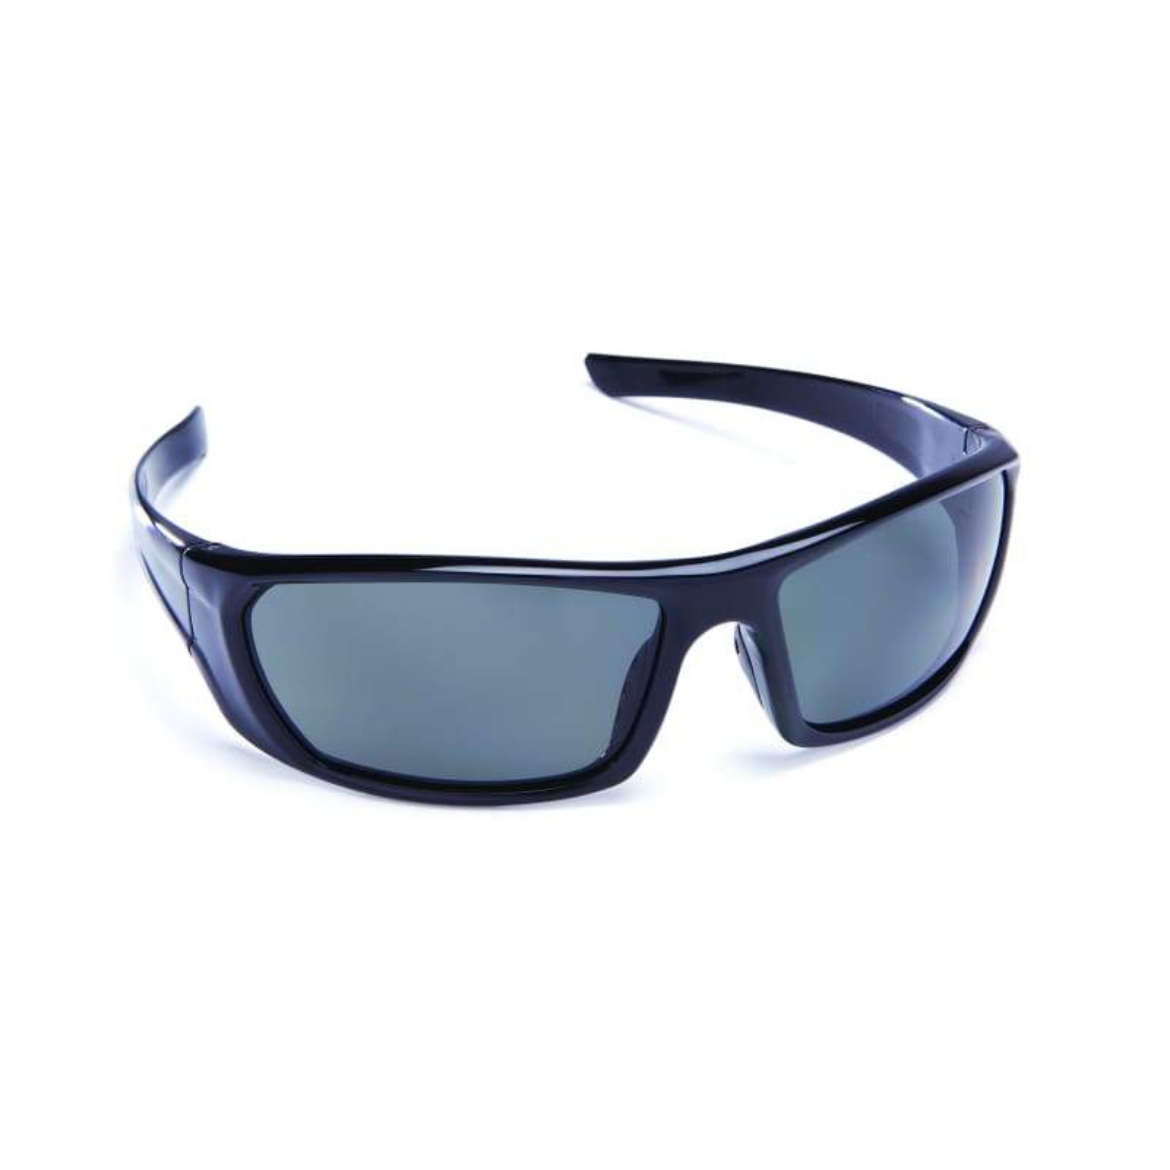 Picture of Force360 Mirage Smoke Polarised Lens Safety Glasses